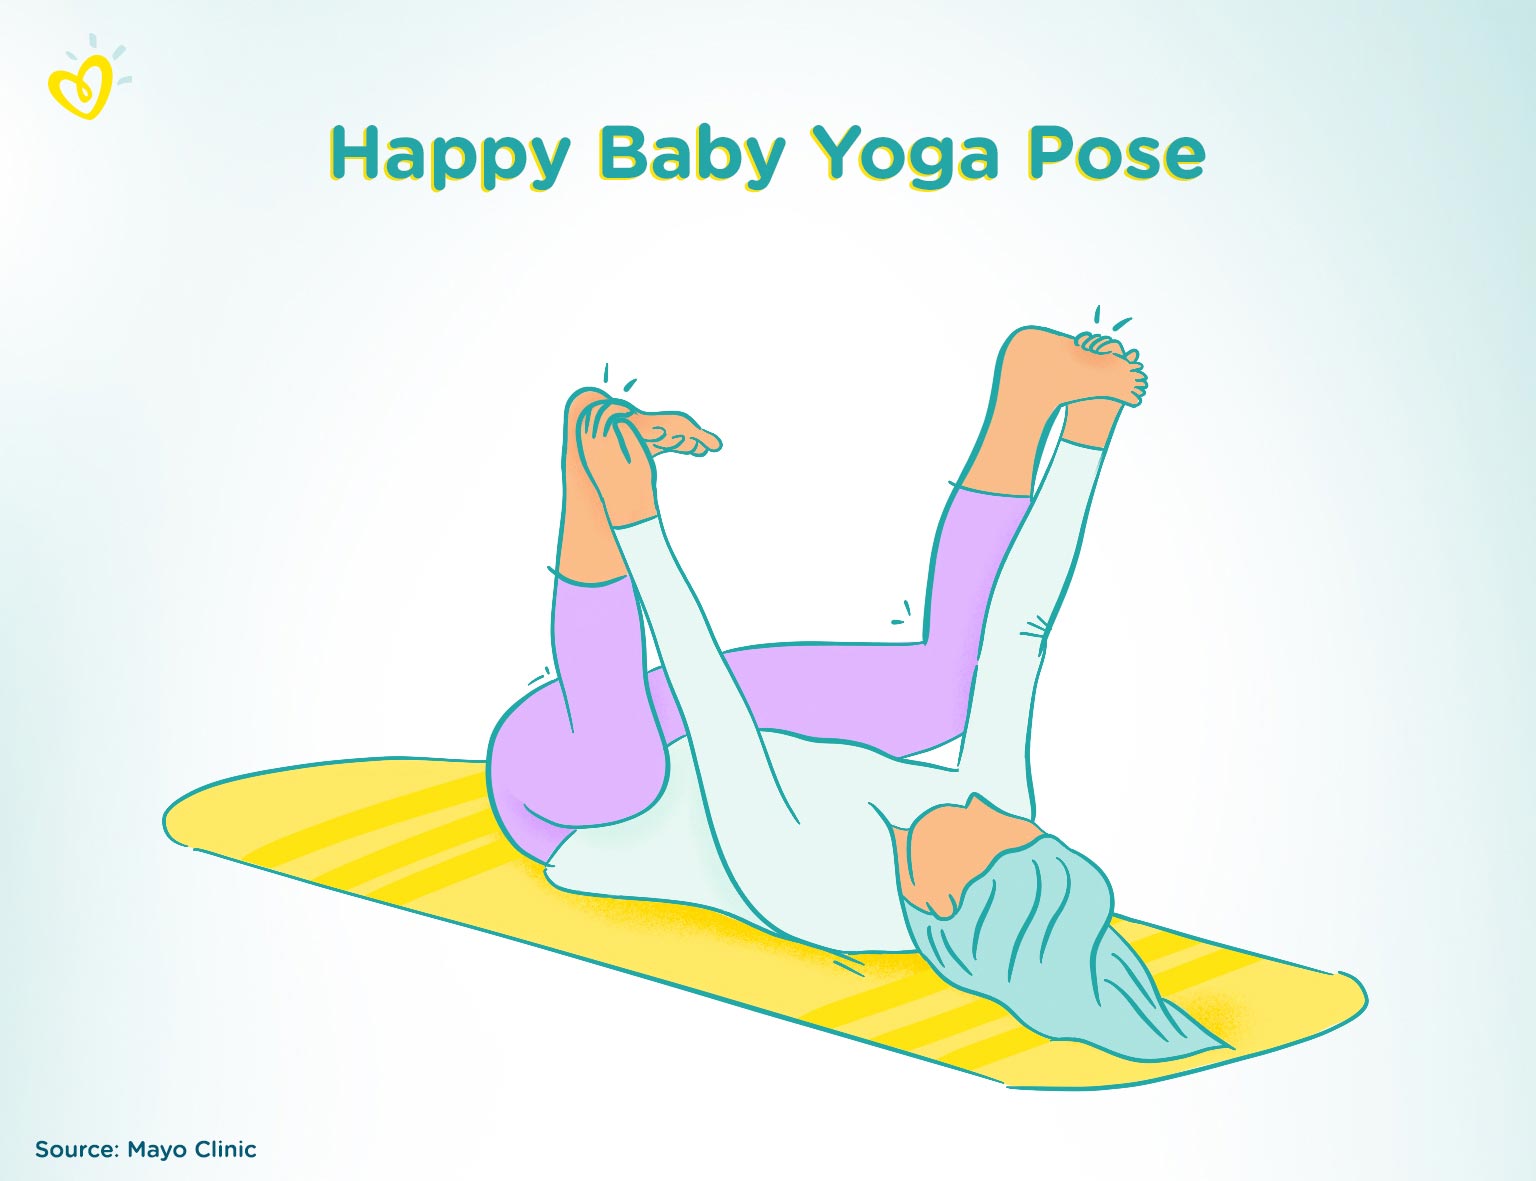 Hip Opening Yoga - Half happy baby】 | Want to loosen tight hips?! Half happy  baby pose is a simple reclined posture that stretches the hips – and most  importantly, it promotes